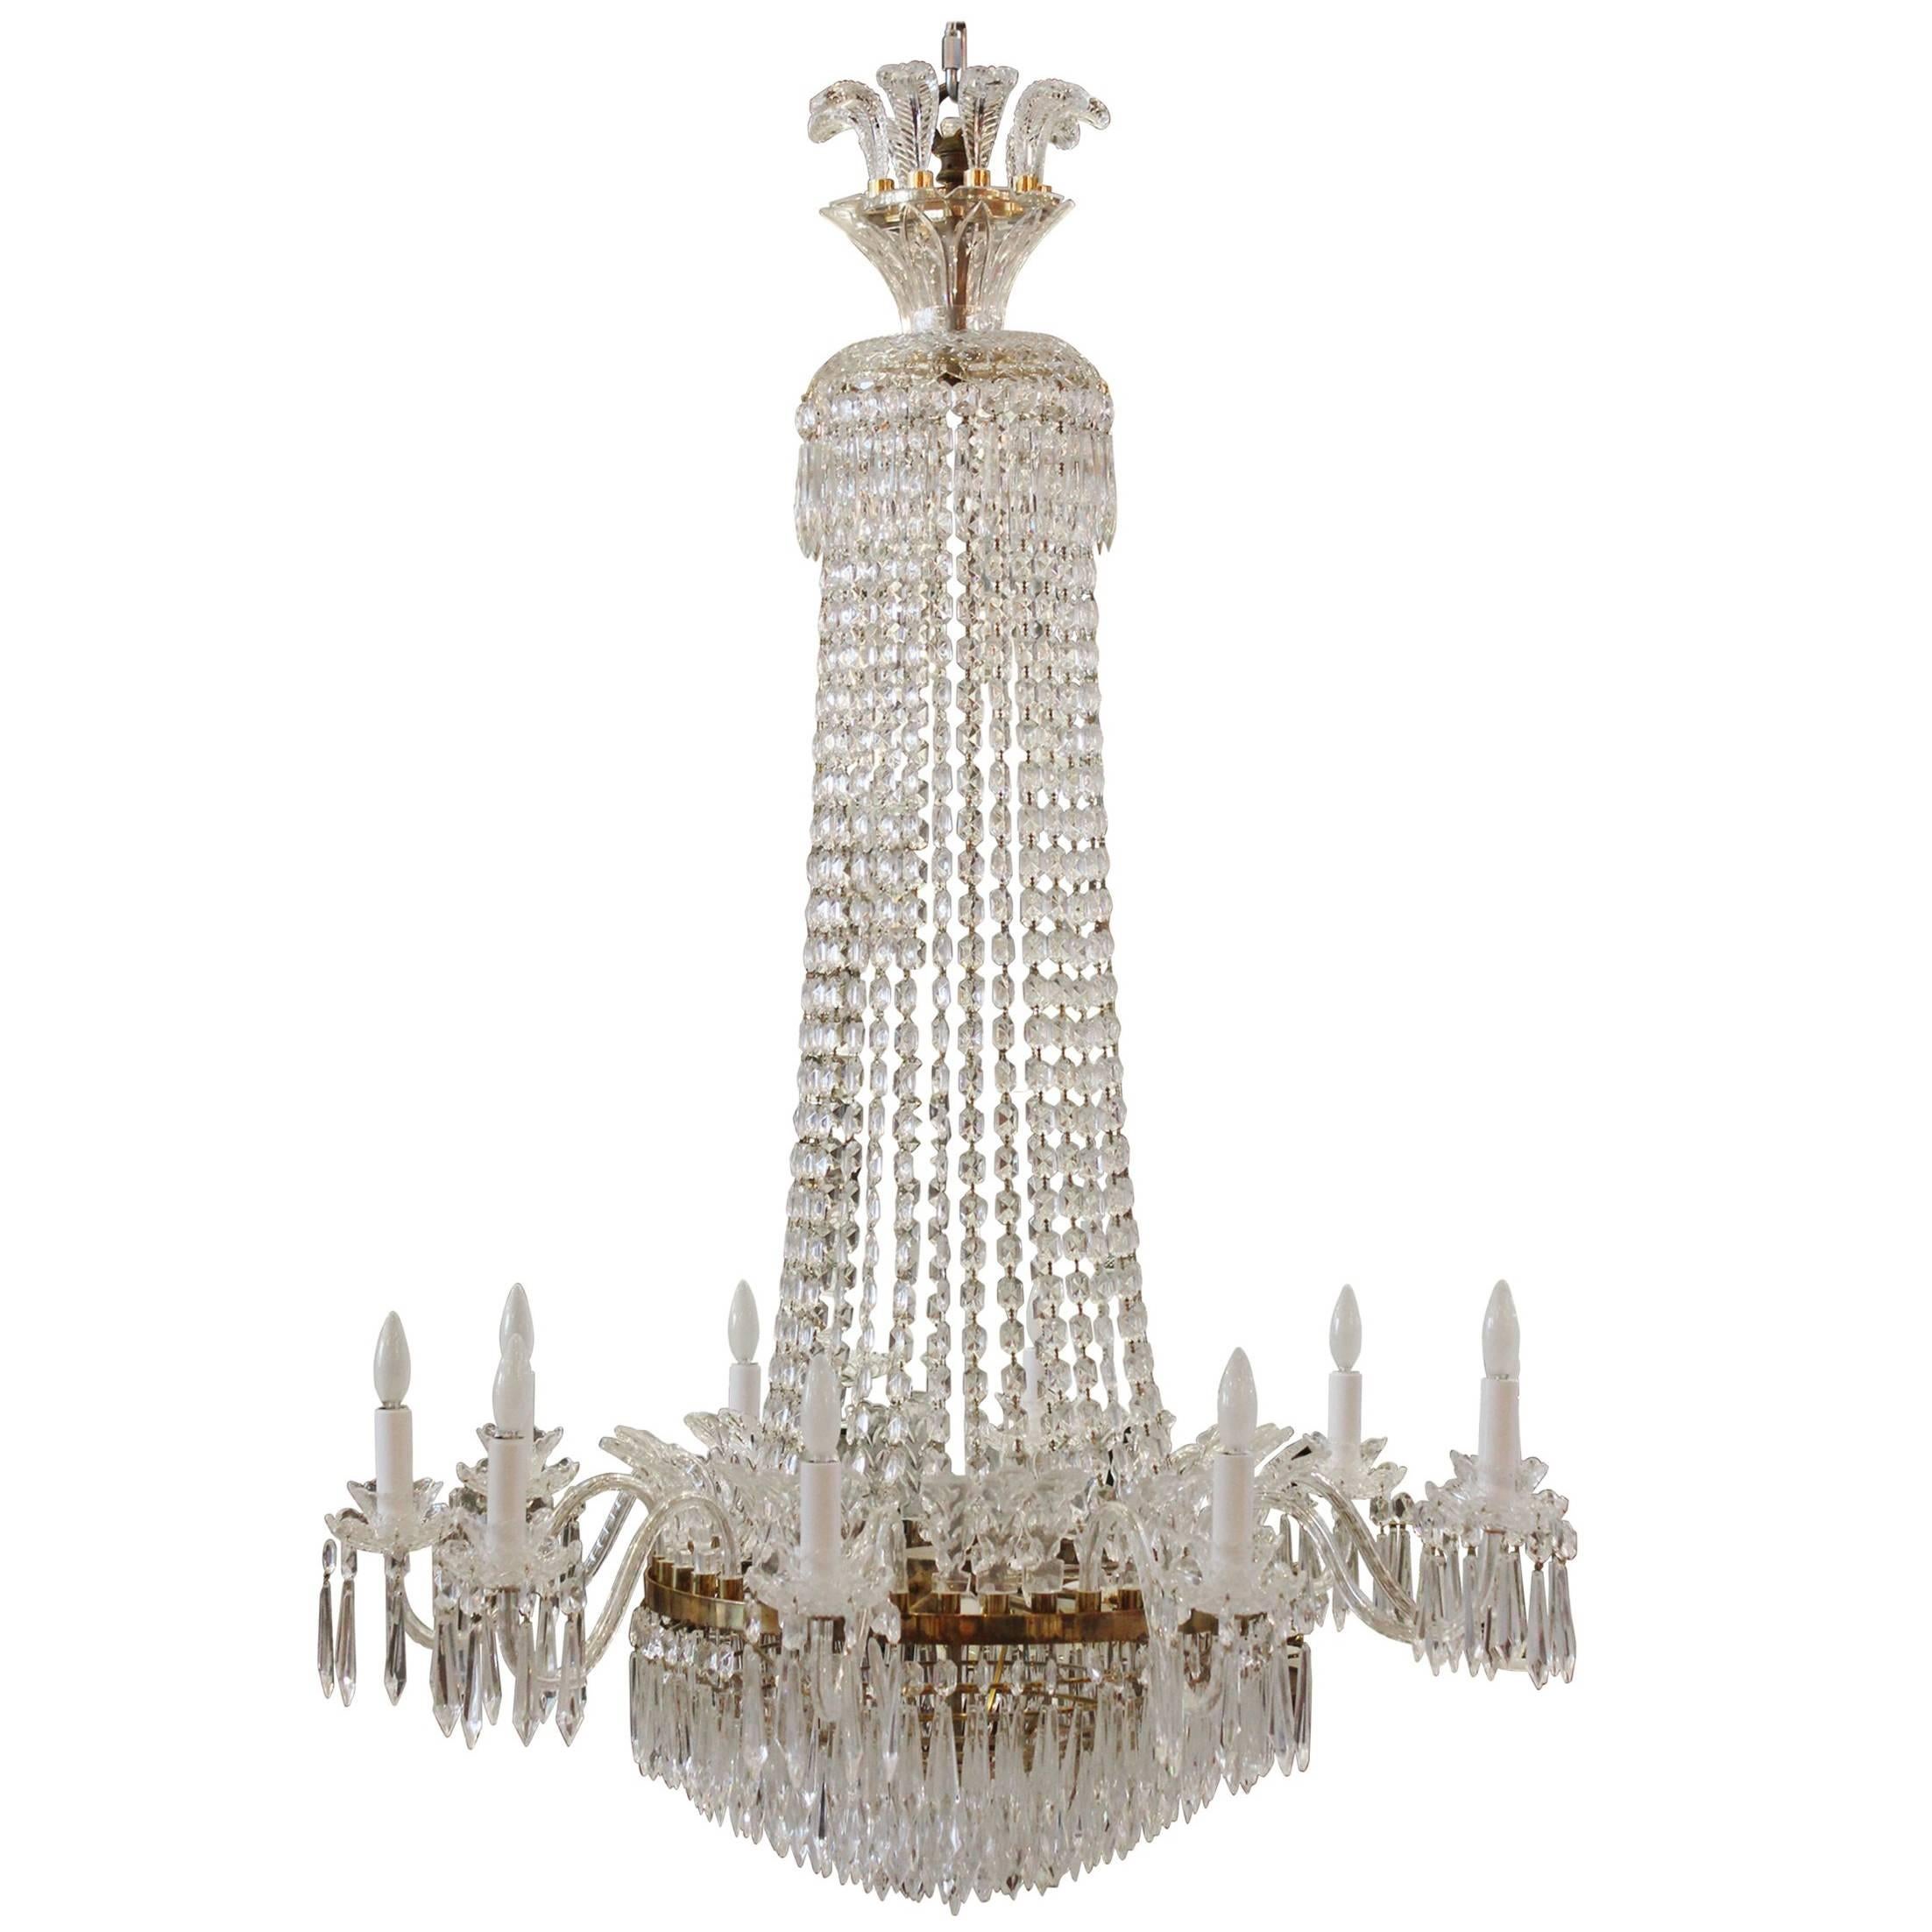 A Impressive Custom Waterford Crystal Chandelier, 65 inches long